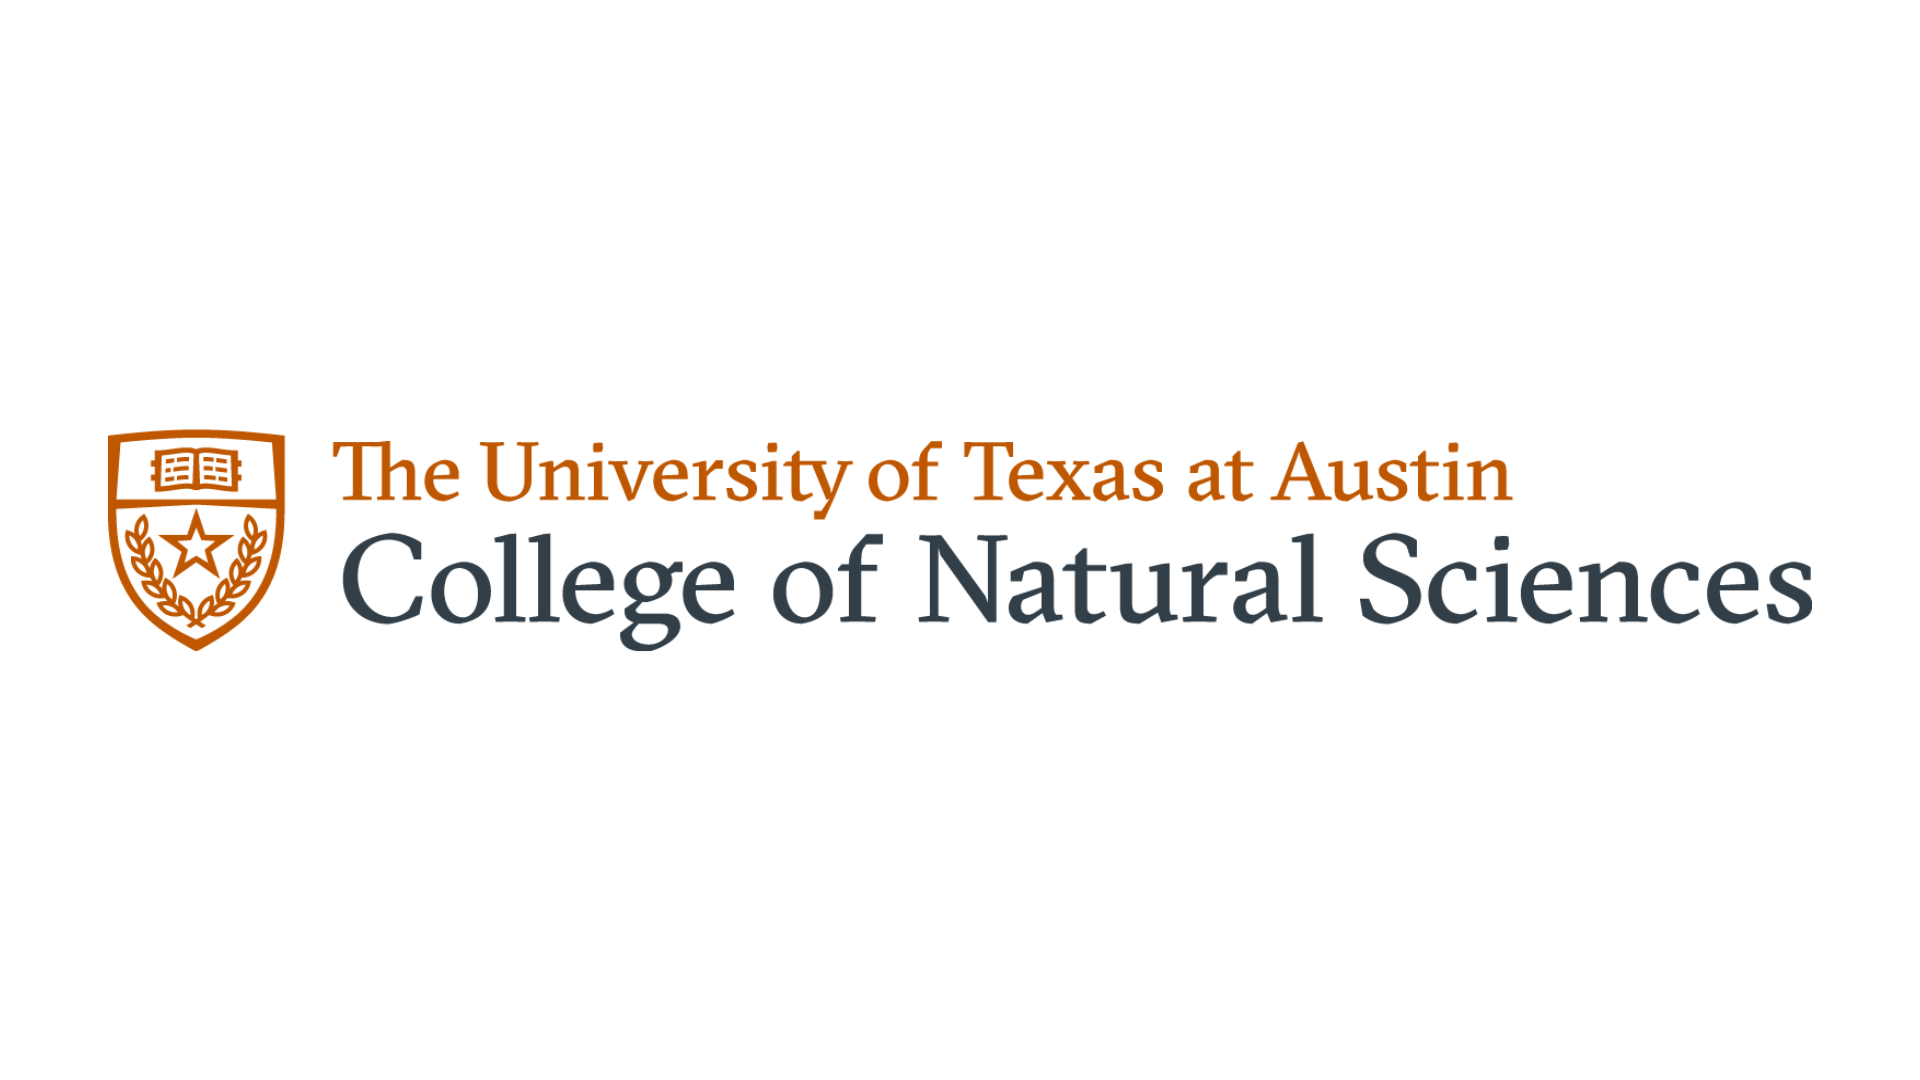 The University of Texas College of Natural Sciences